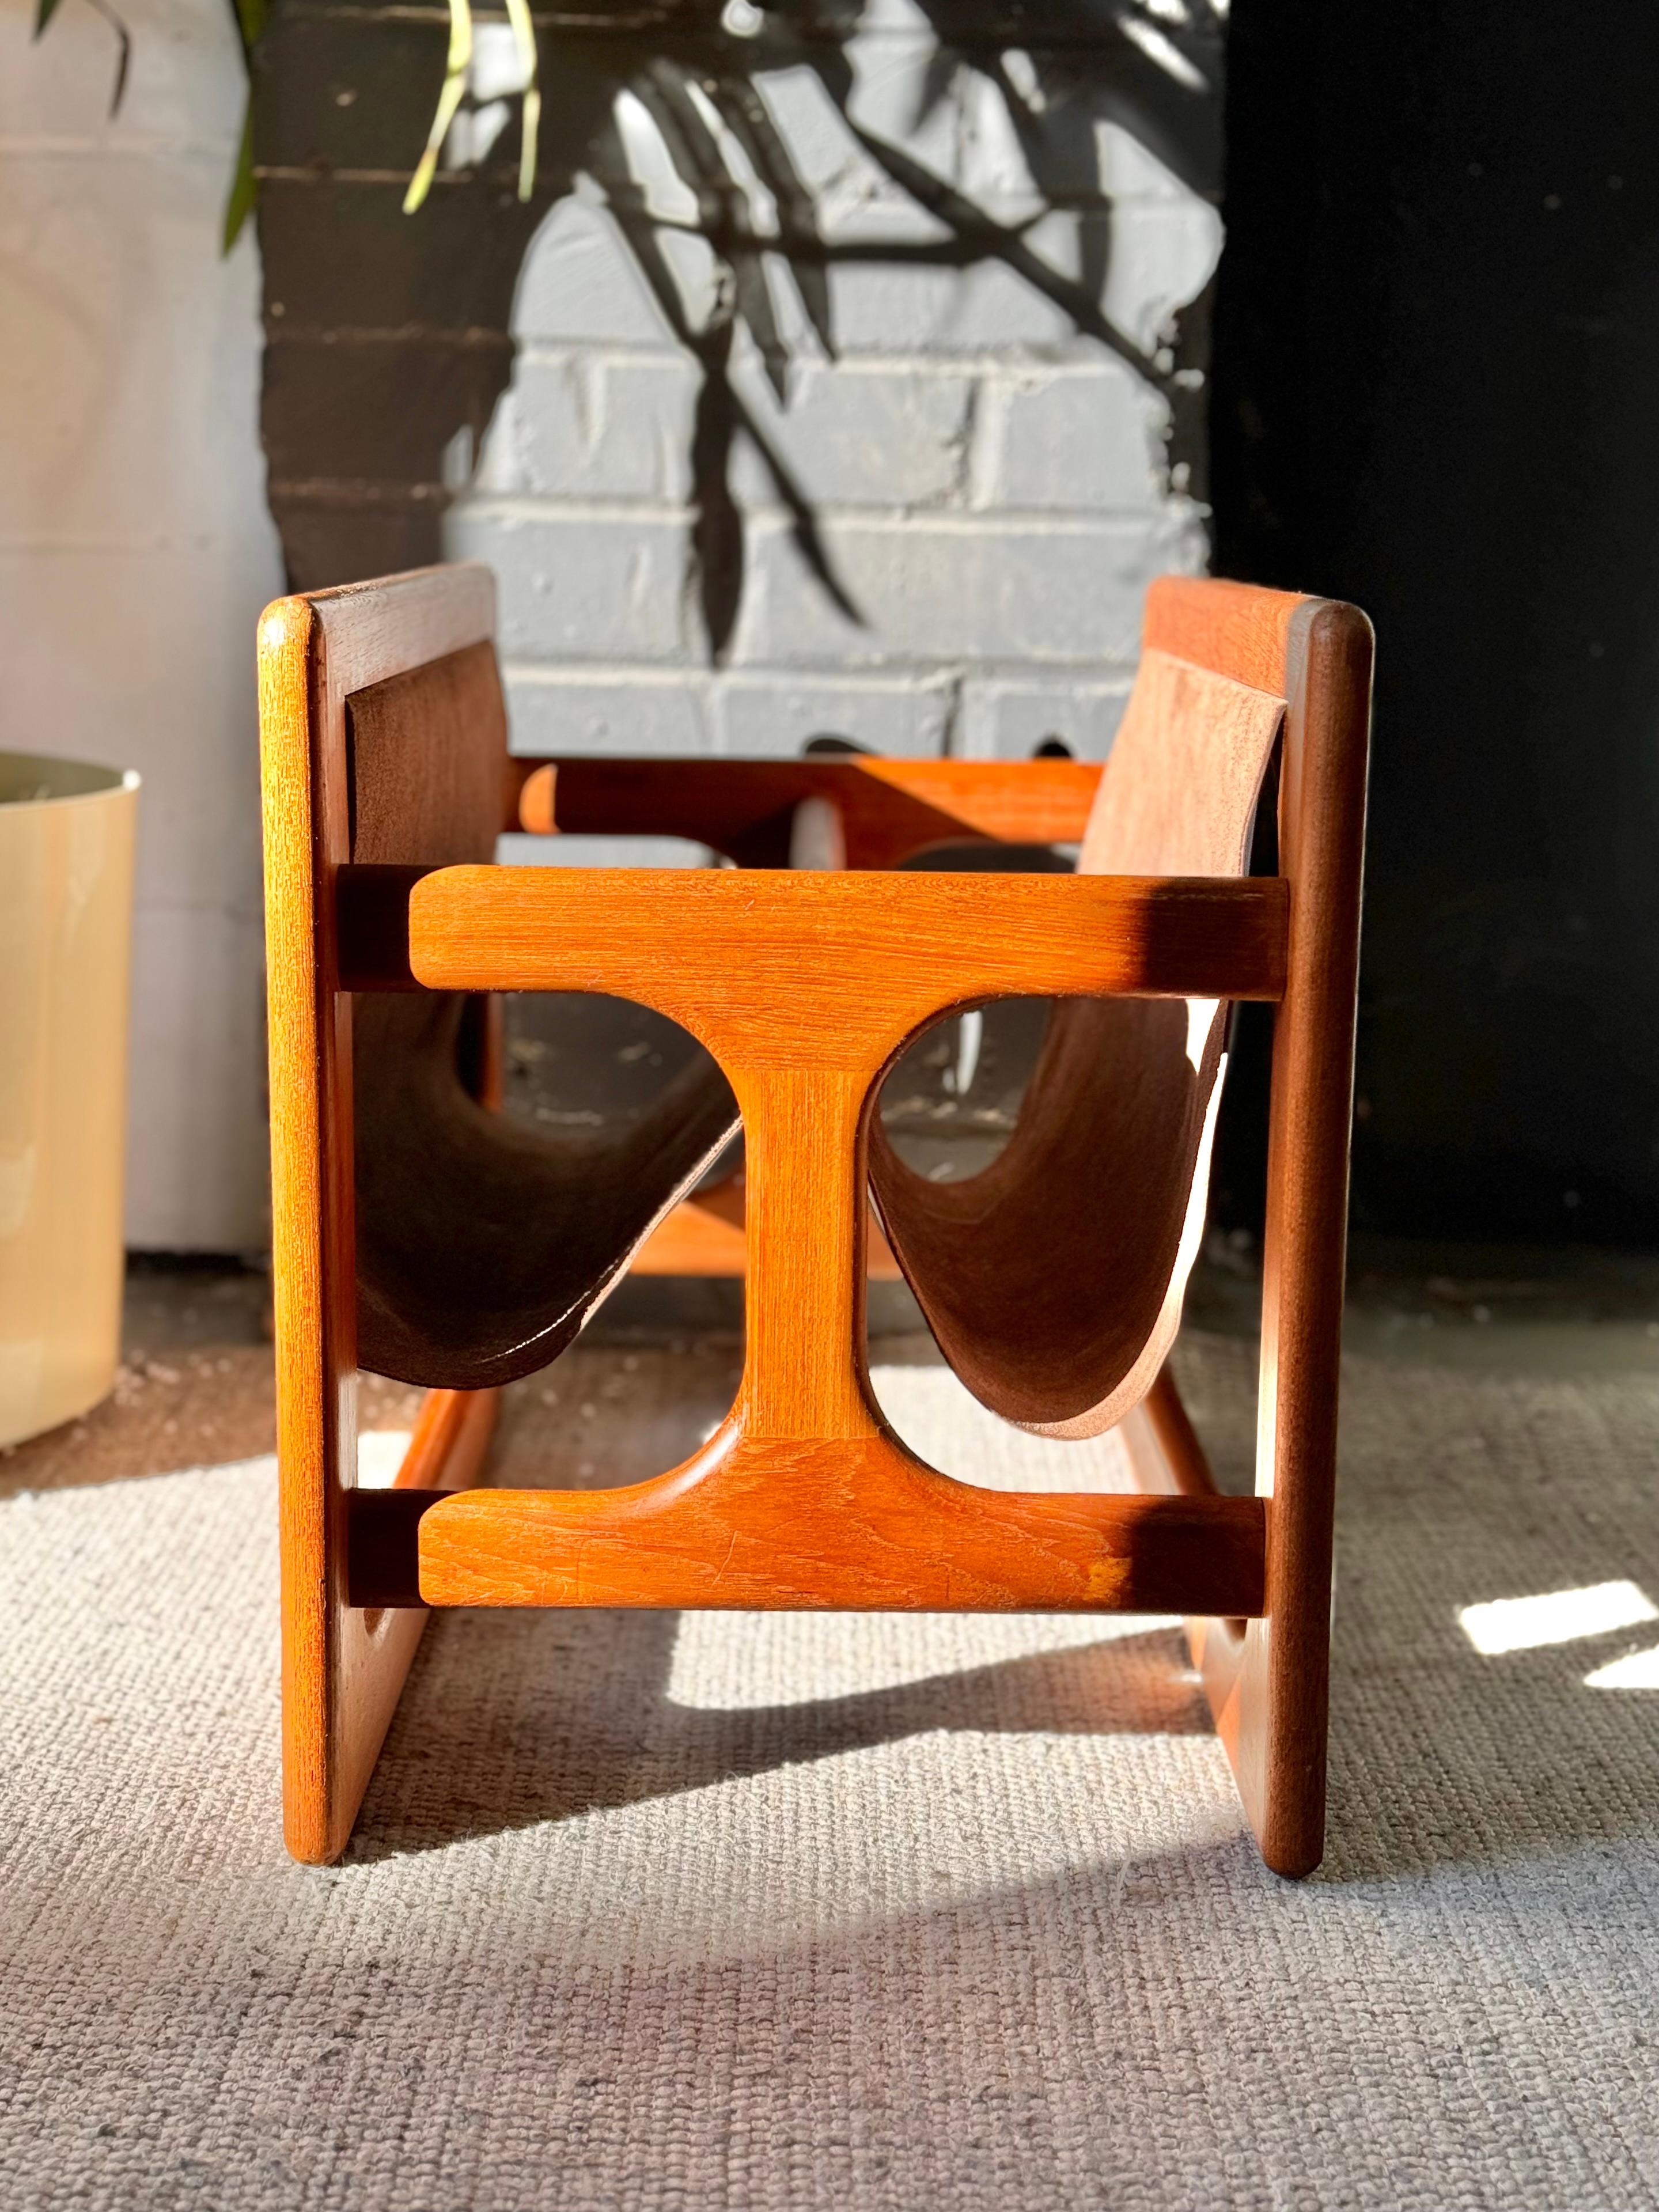 Sublime vintage Danish teak magazine rack. Leather & suede lined pouch. Beautiful texture play between the construction materials.

Functional & a great statement piece. 